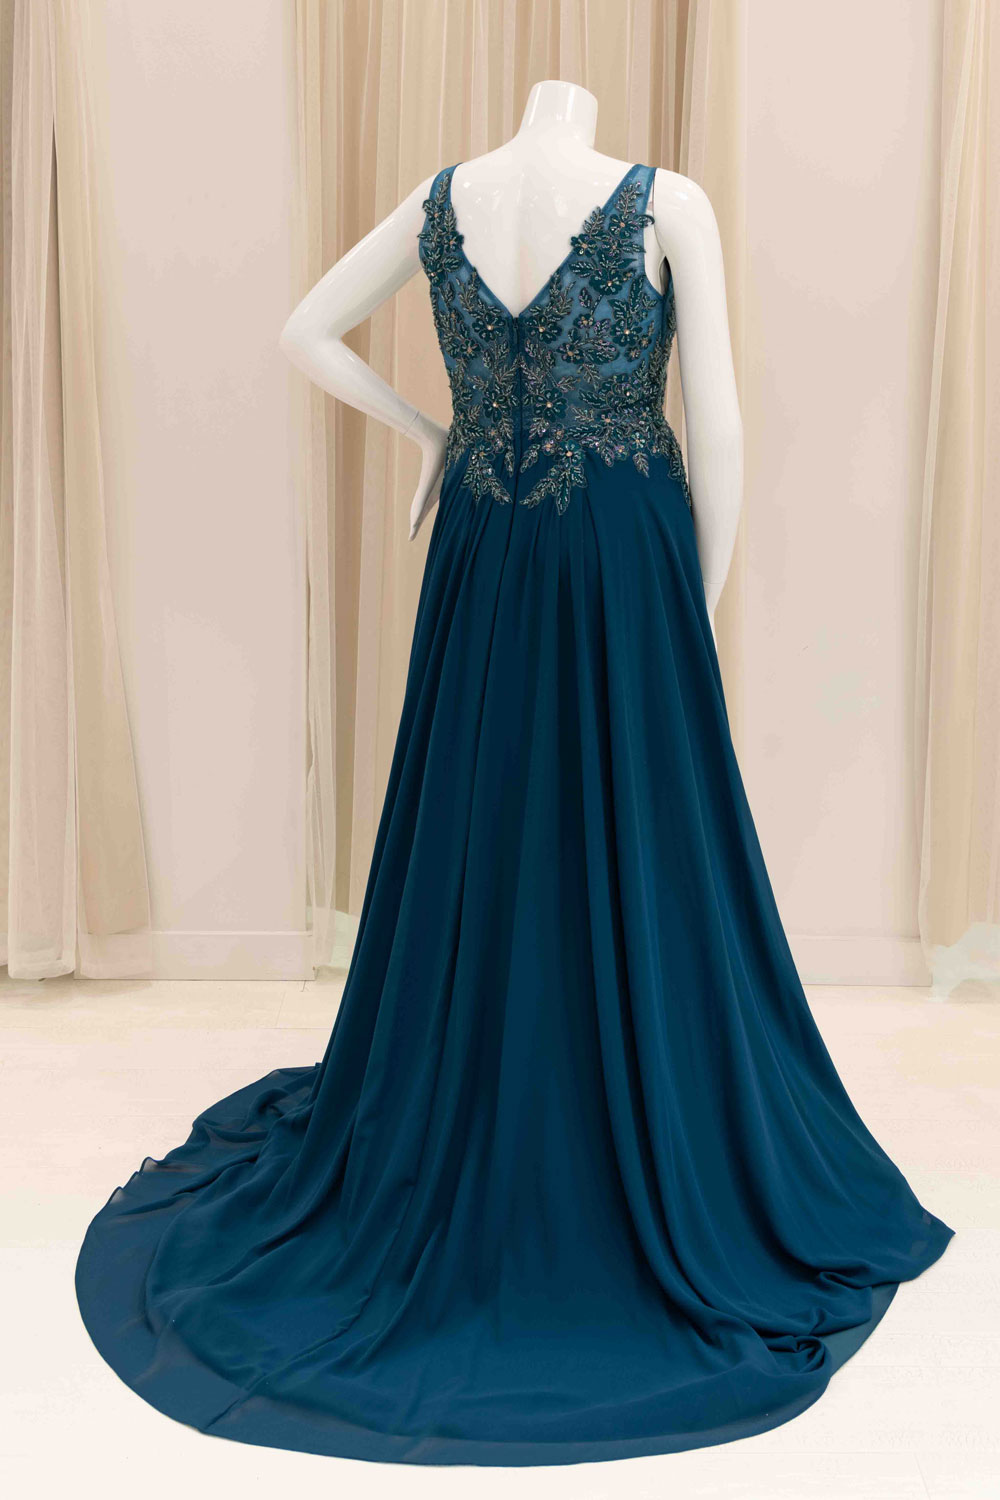 Mother of the Bride Dress in Teal